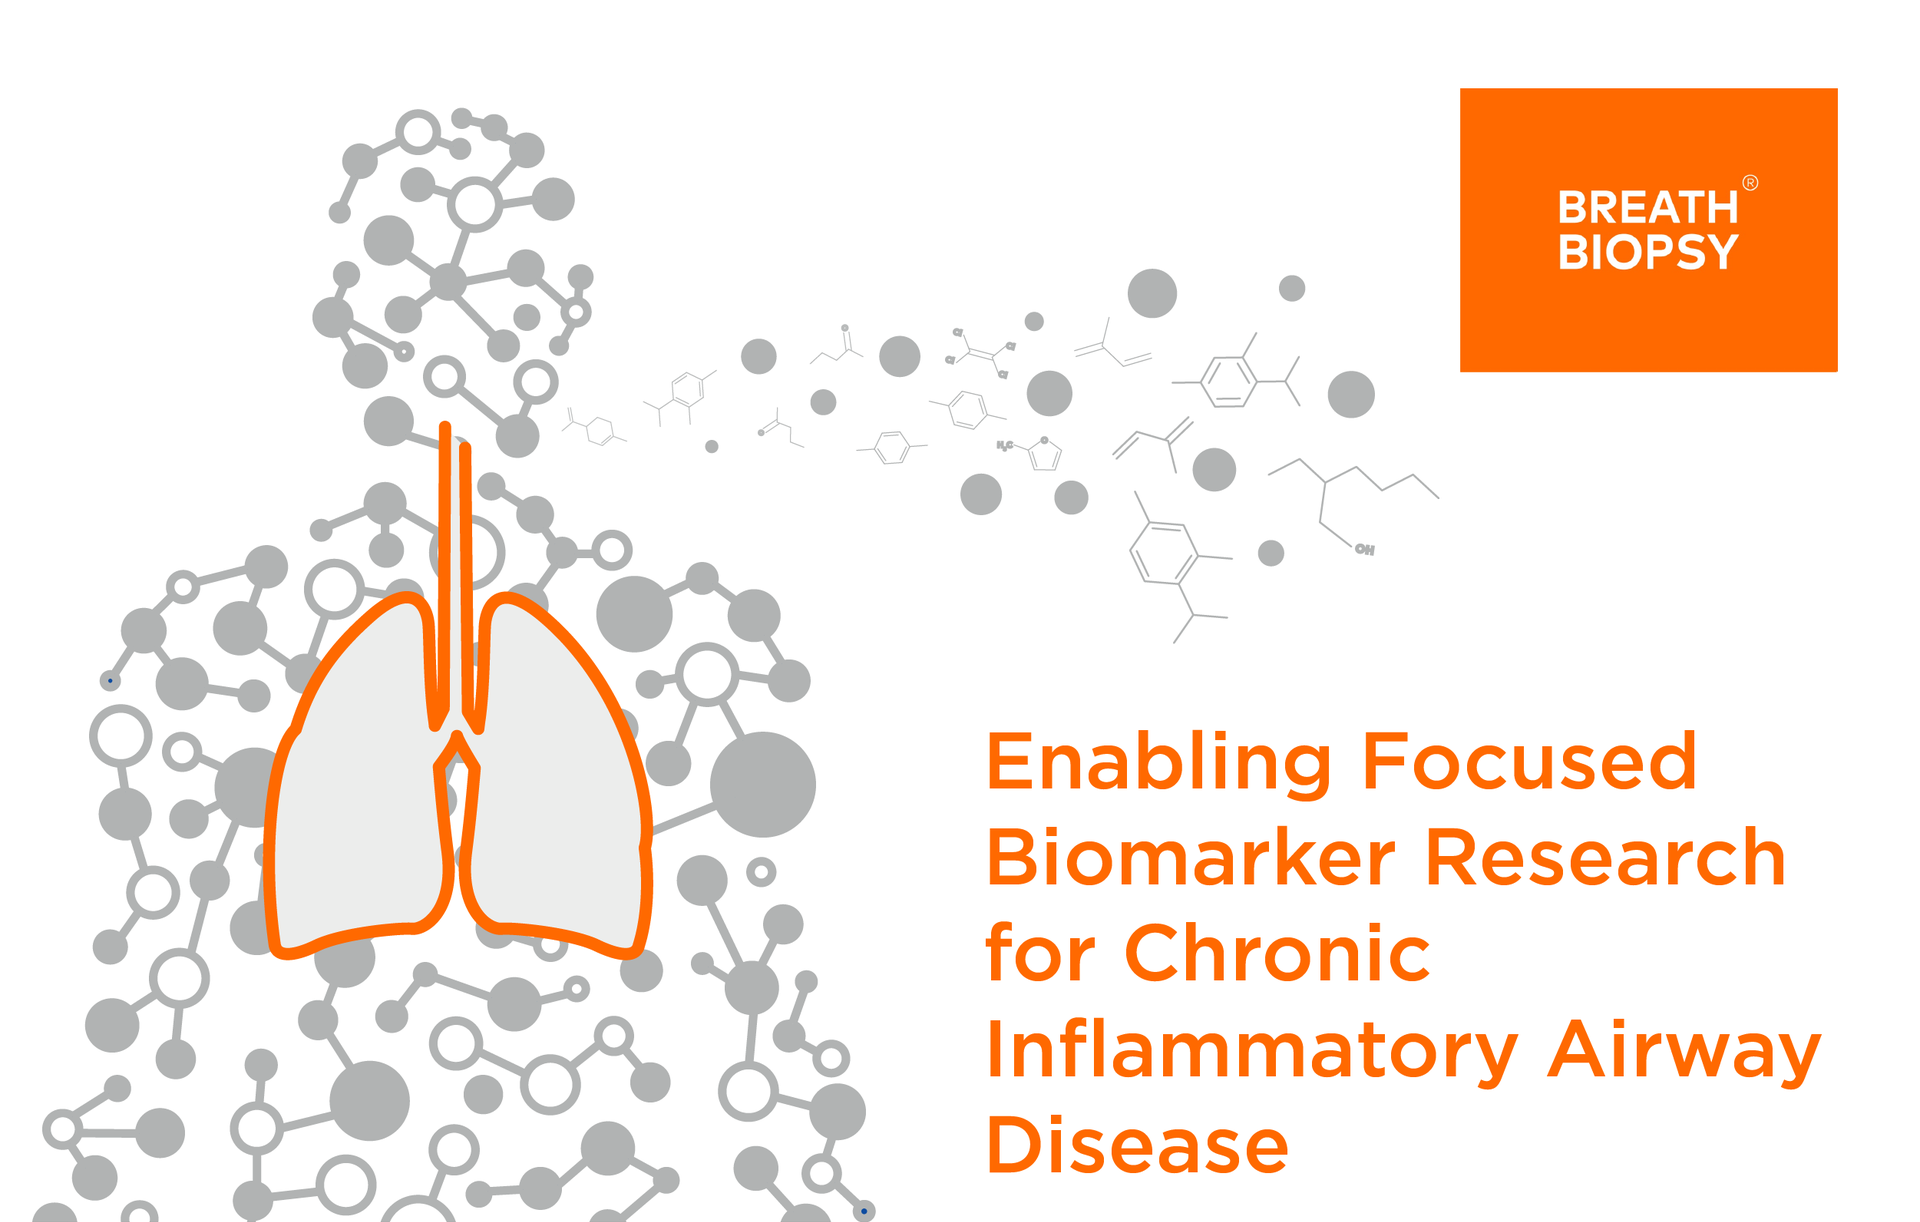 Enabling Focused Biomarker Research for Chronic Inflammatory Airway Disease - Owlstone Medical - the home of Breath Biopsy®